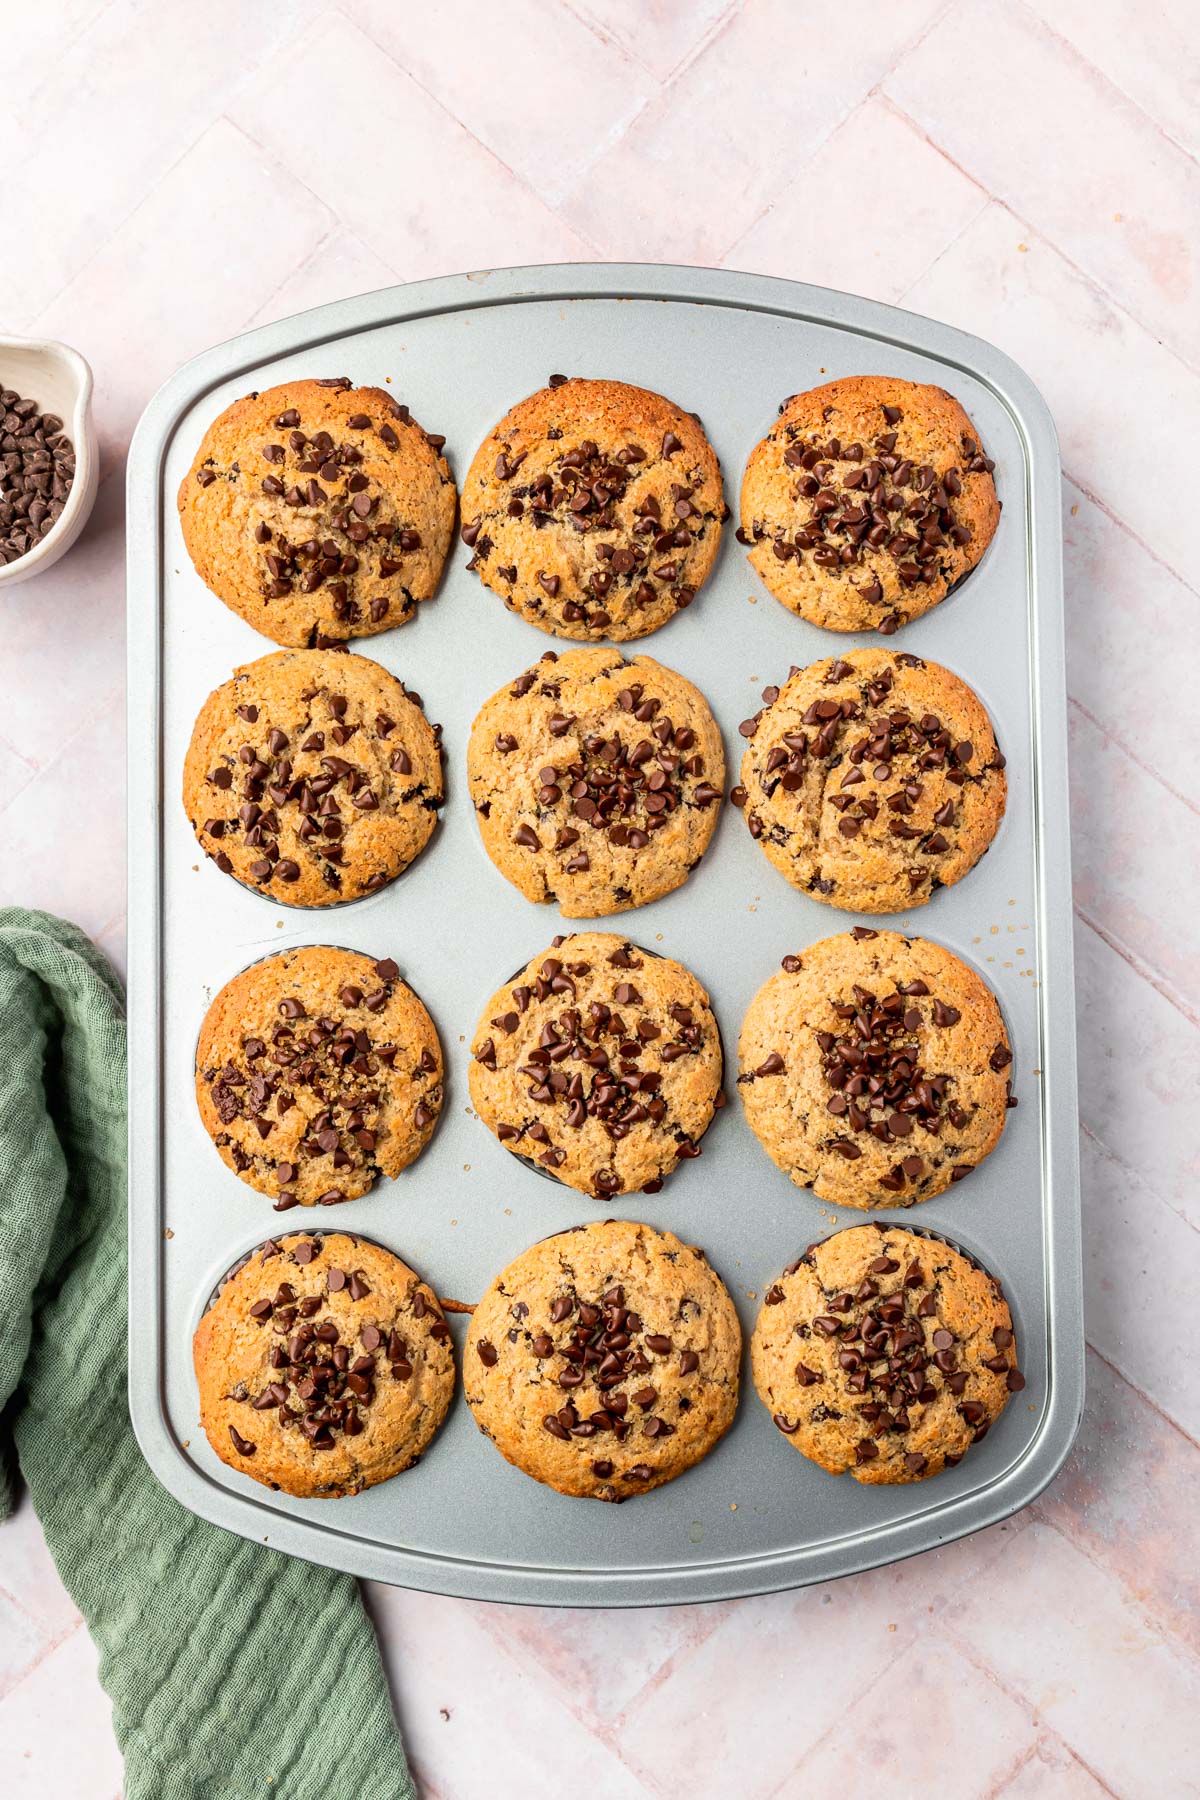 A 12-cup muffin tray filled with baked gluten-free chocolate chip muffins.